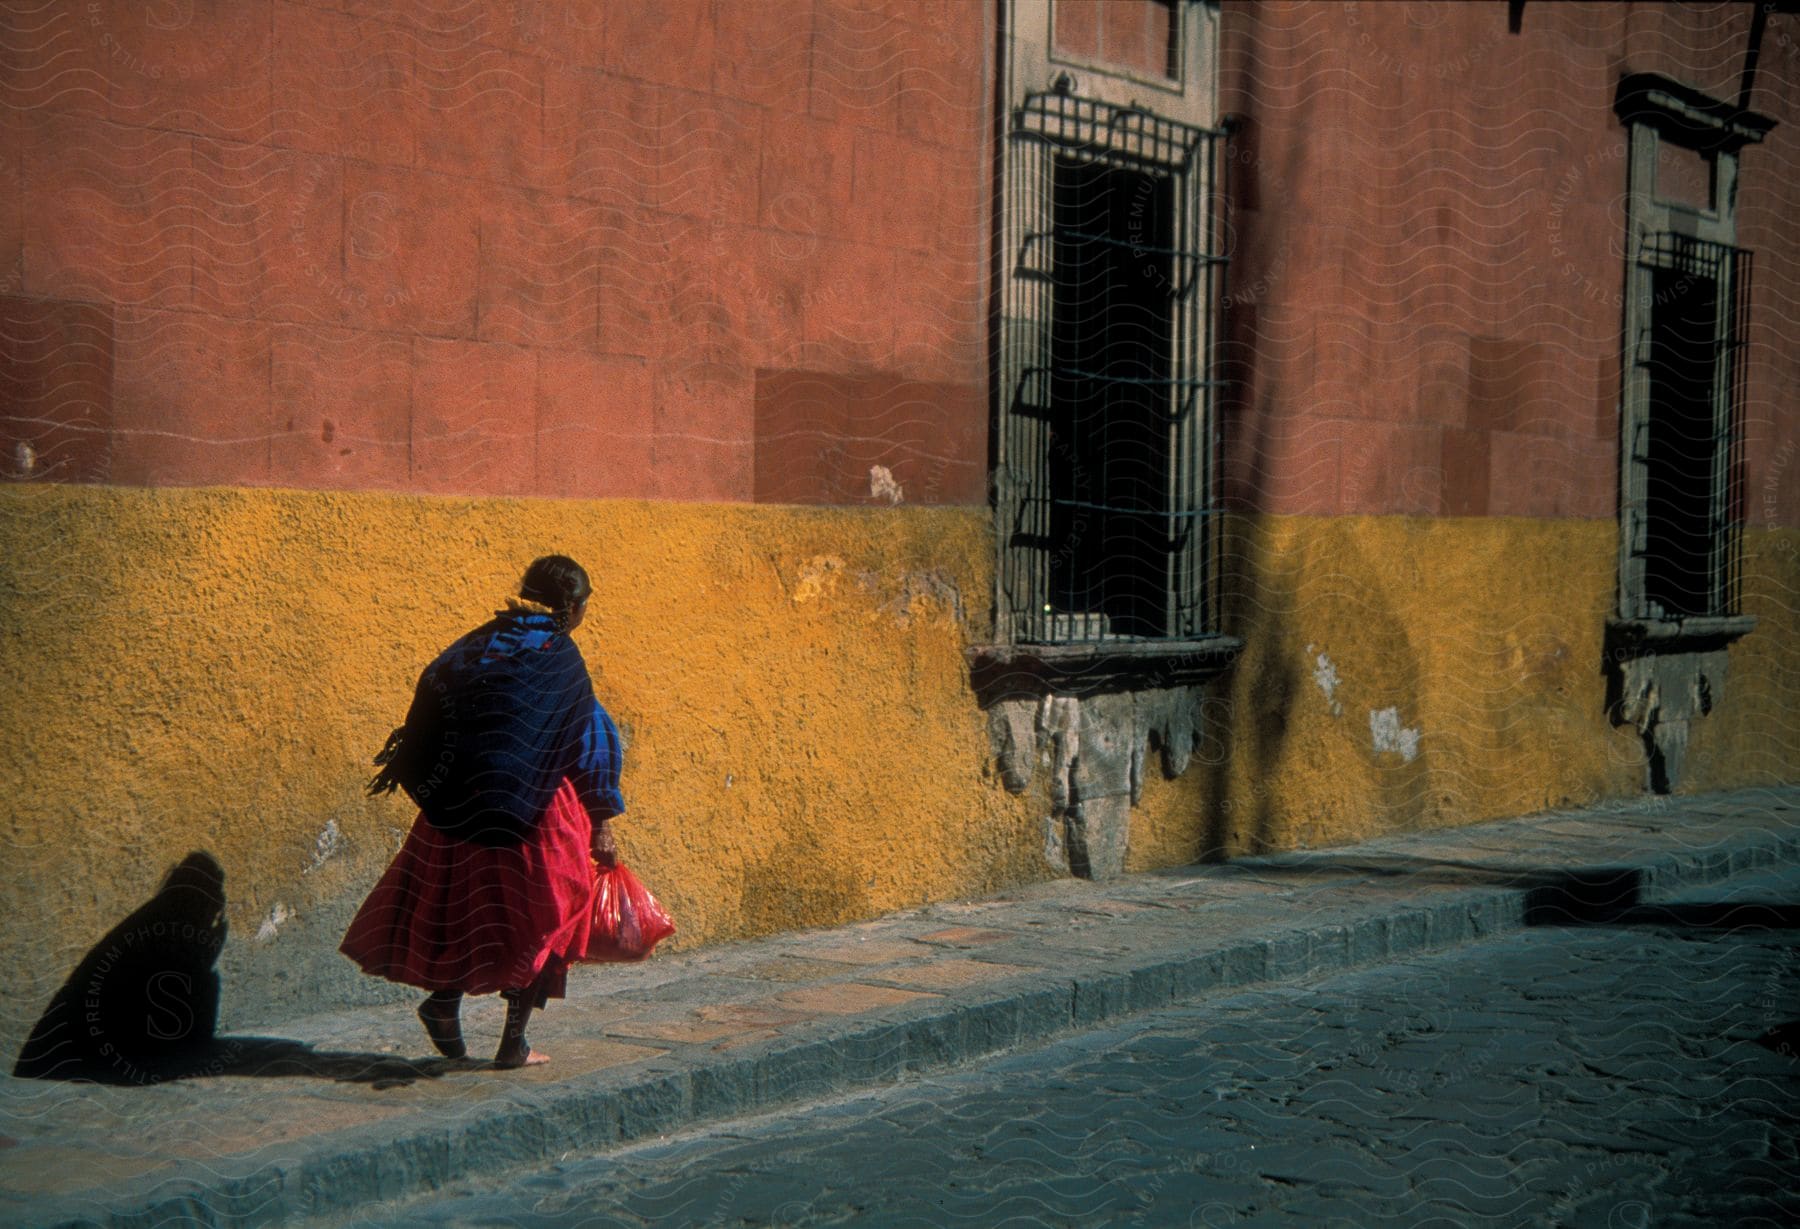 A woman carries a bag on the sidewalk by an old building